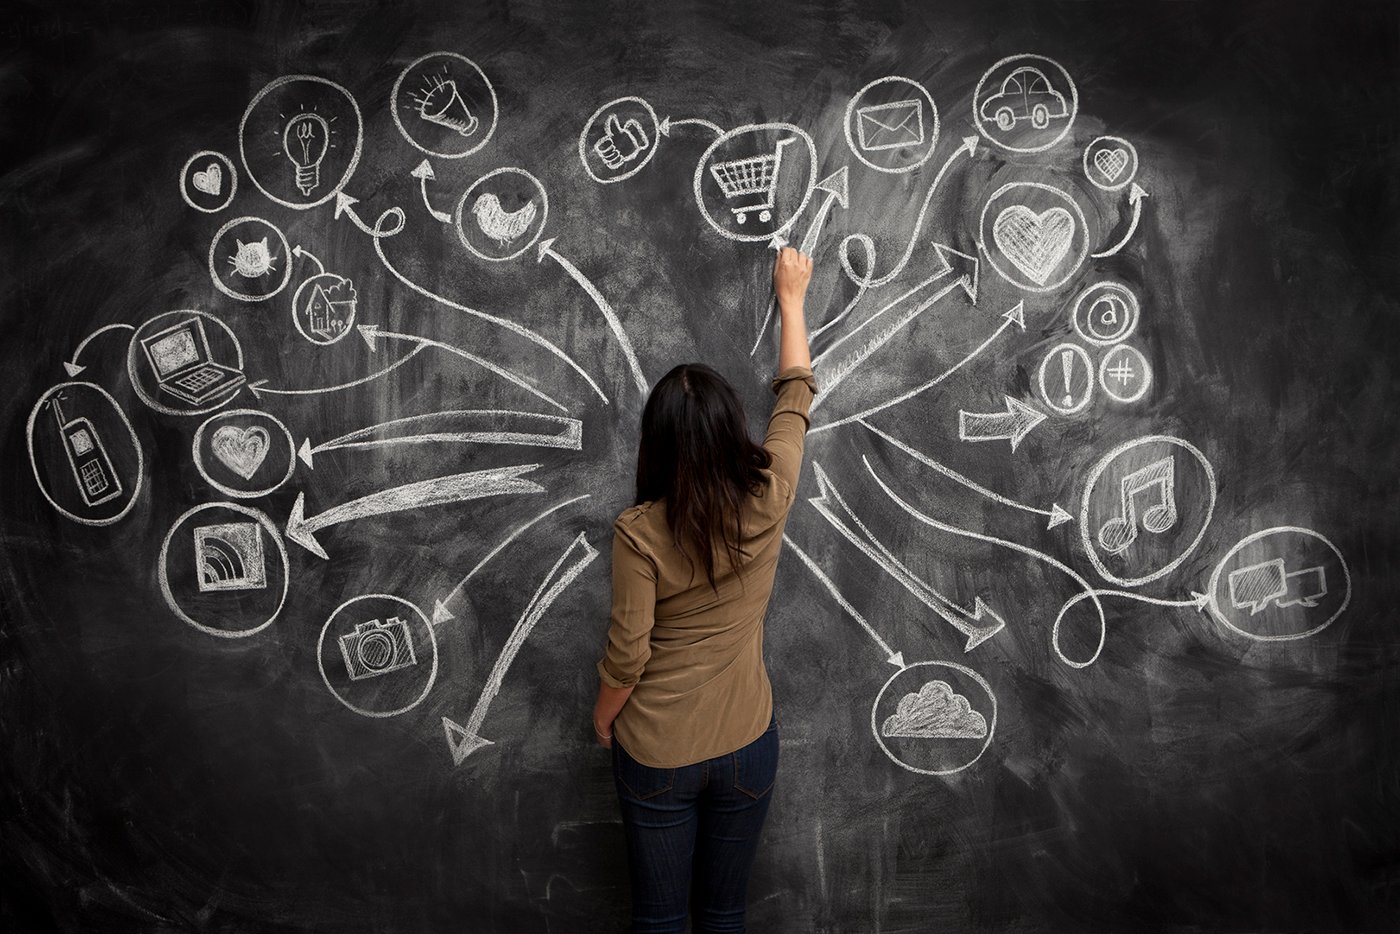 A woman writing on a chalkboard with various symbols and icons.